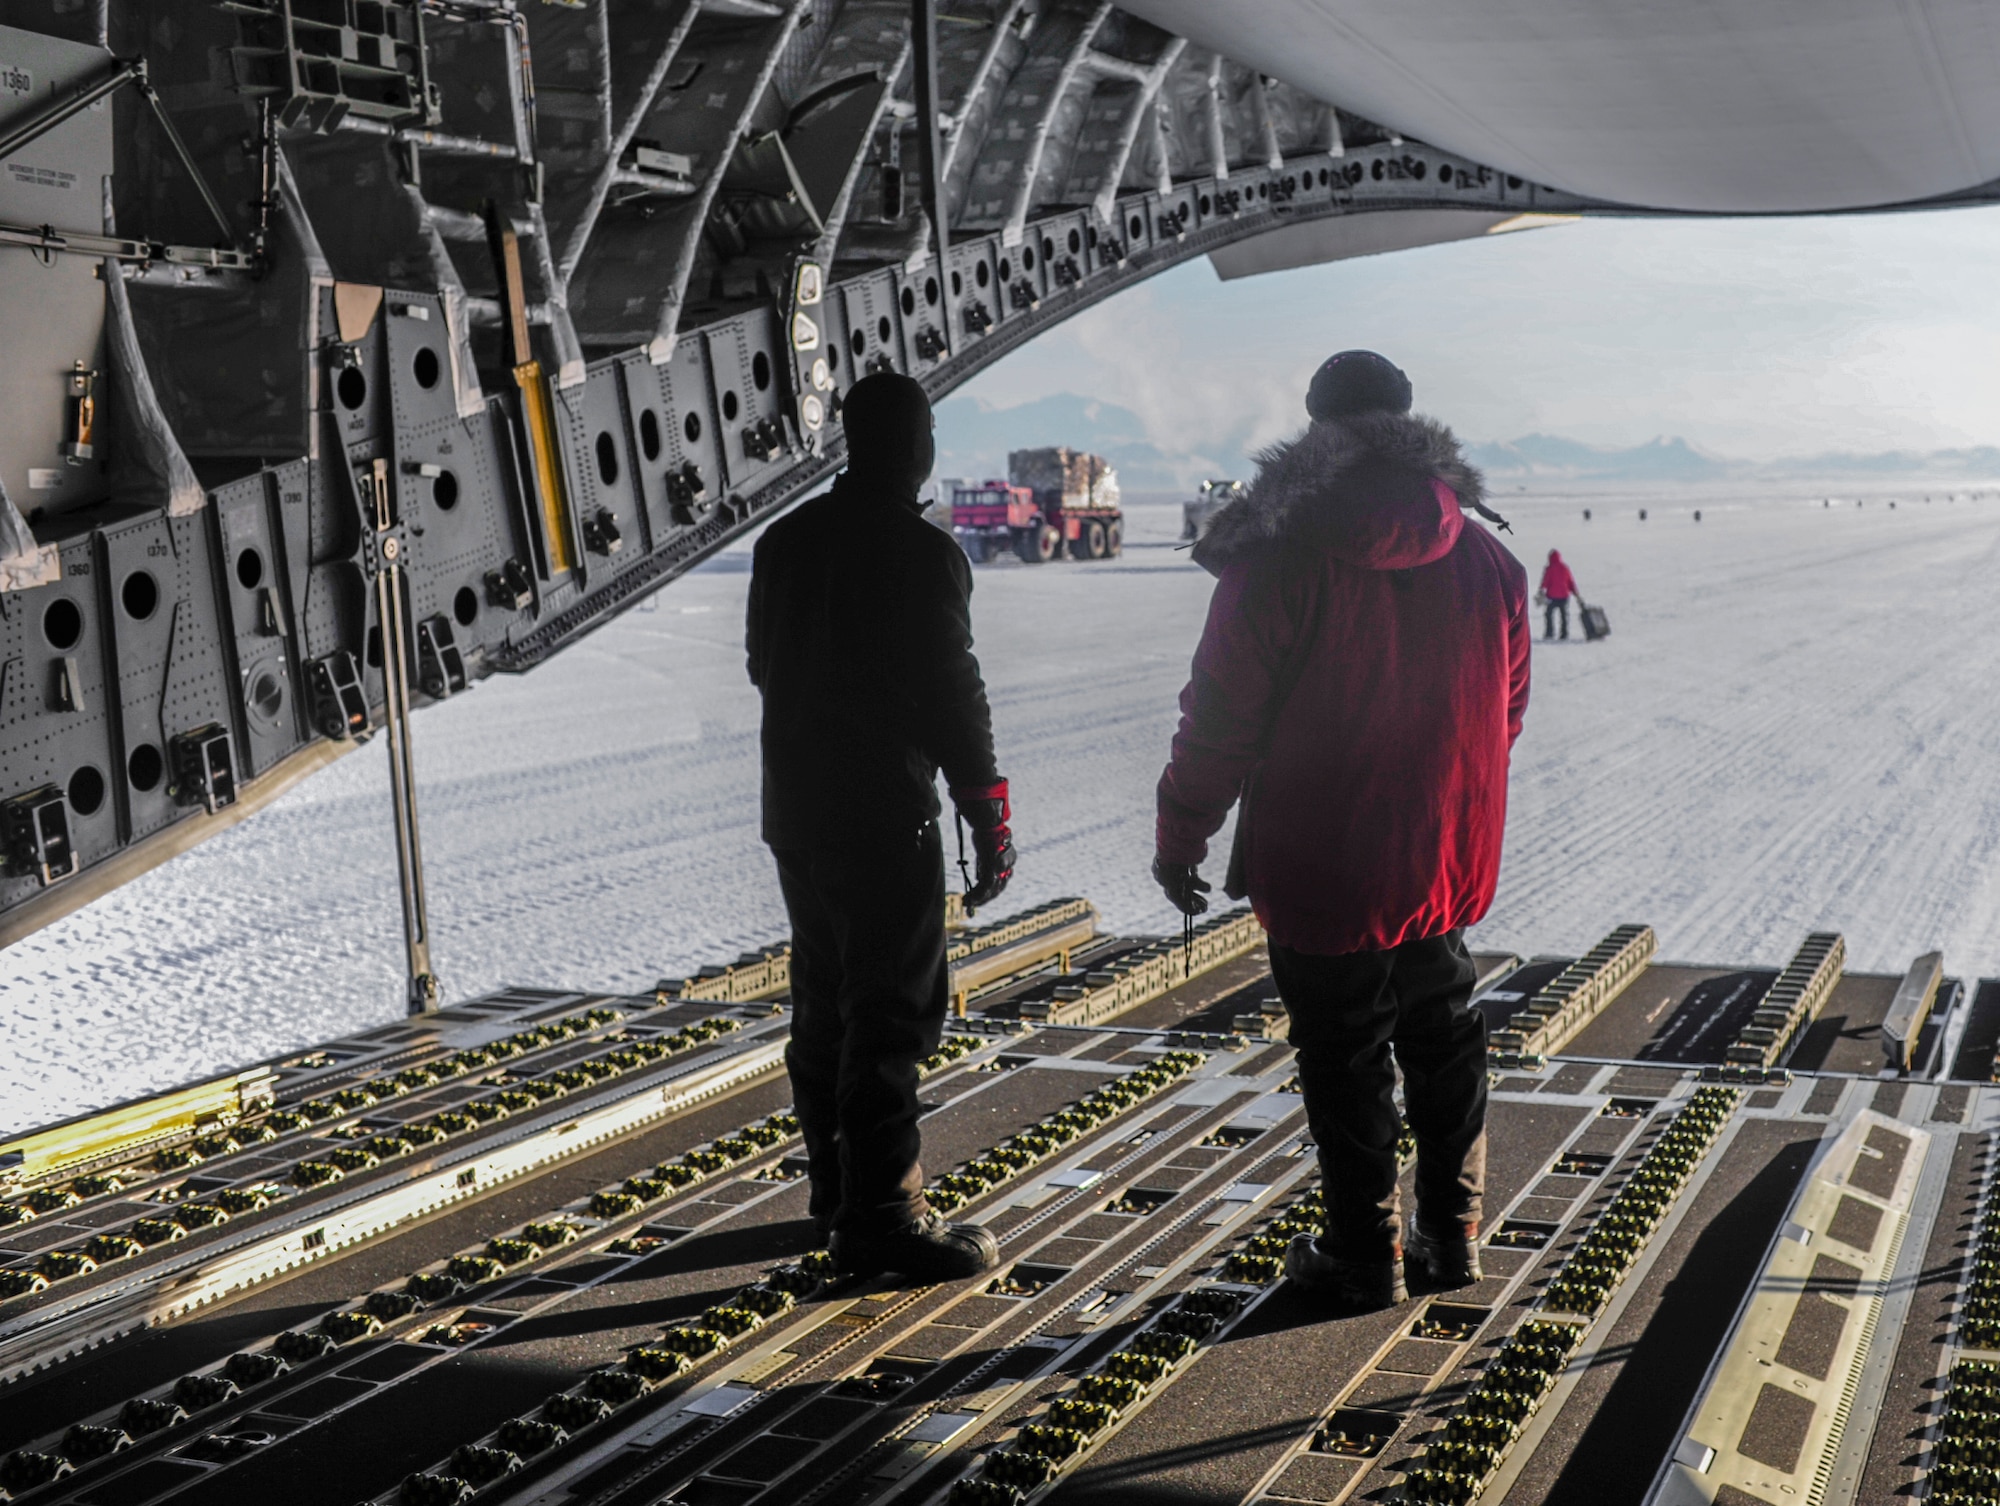 304th Expeditionary Airlift Squadron loadmasters wearing cold weather gear, await a forklift to load a pallet of cargo onto a C-17 Globemaster III aircraft, Oct. 1, 2012, on the seasonal ice runway outside of McMurdo Station, Antarctica. The temperature reached minus 35 degrees Fahrenheit while crews loaded and unloaded cargo in support of Operation Deep Freeze. (U.S. Air Force photo/Staff Sgt. Sean Tobin)